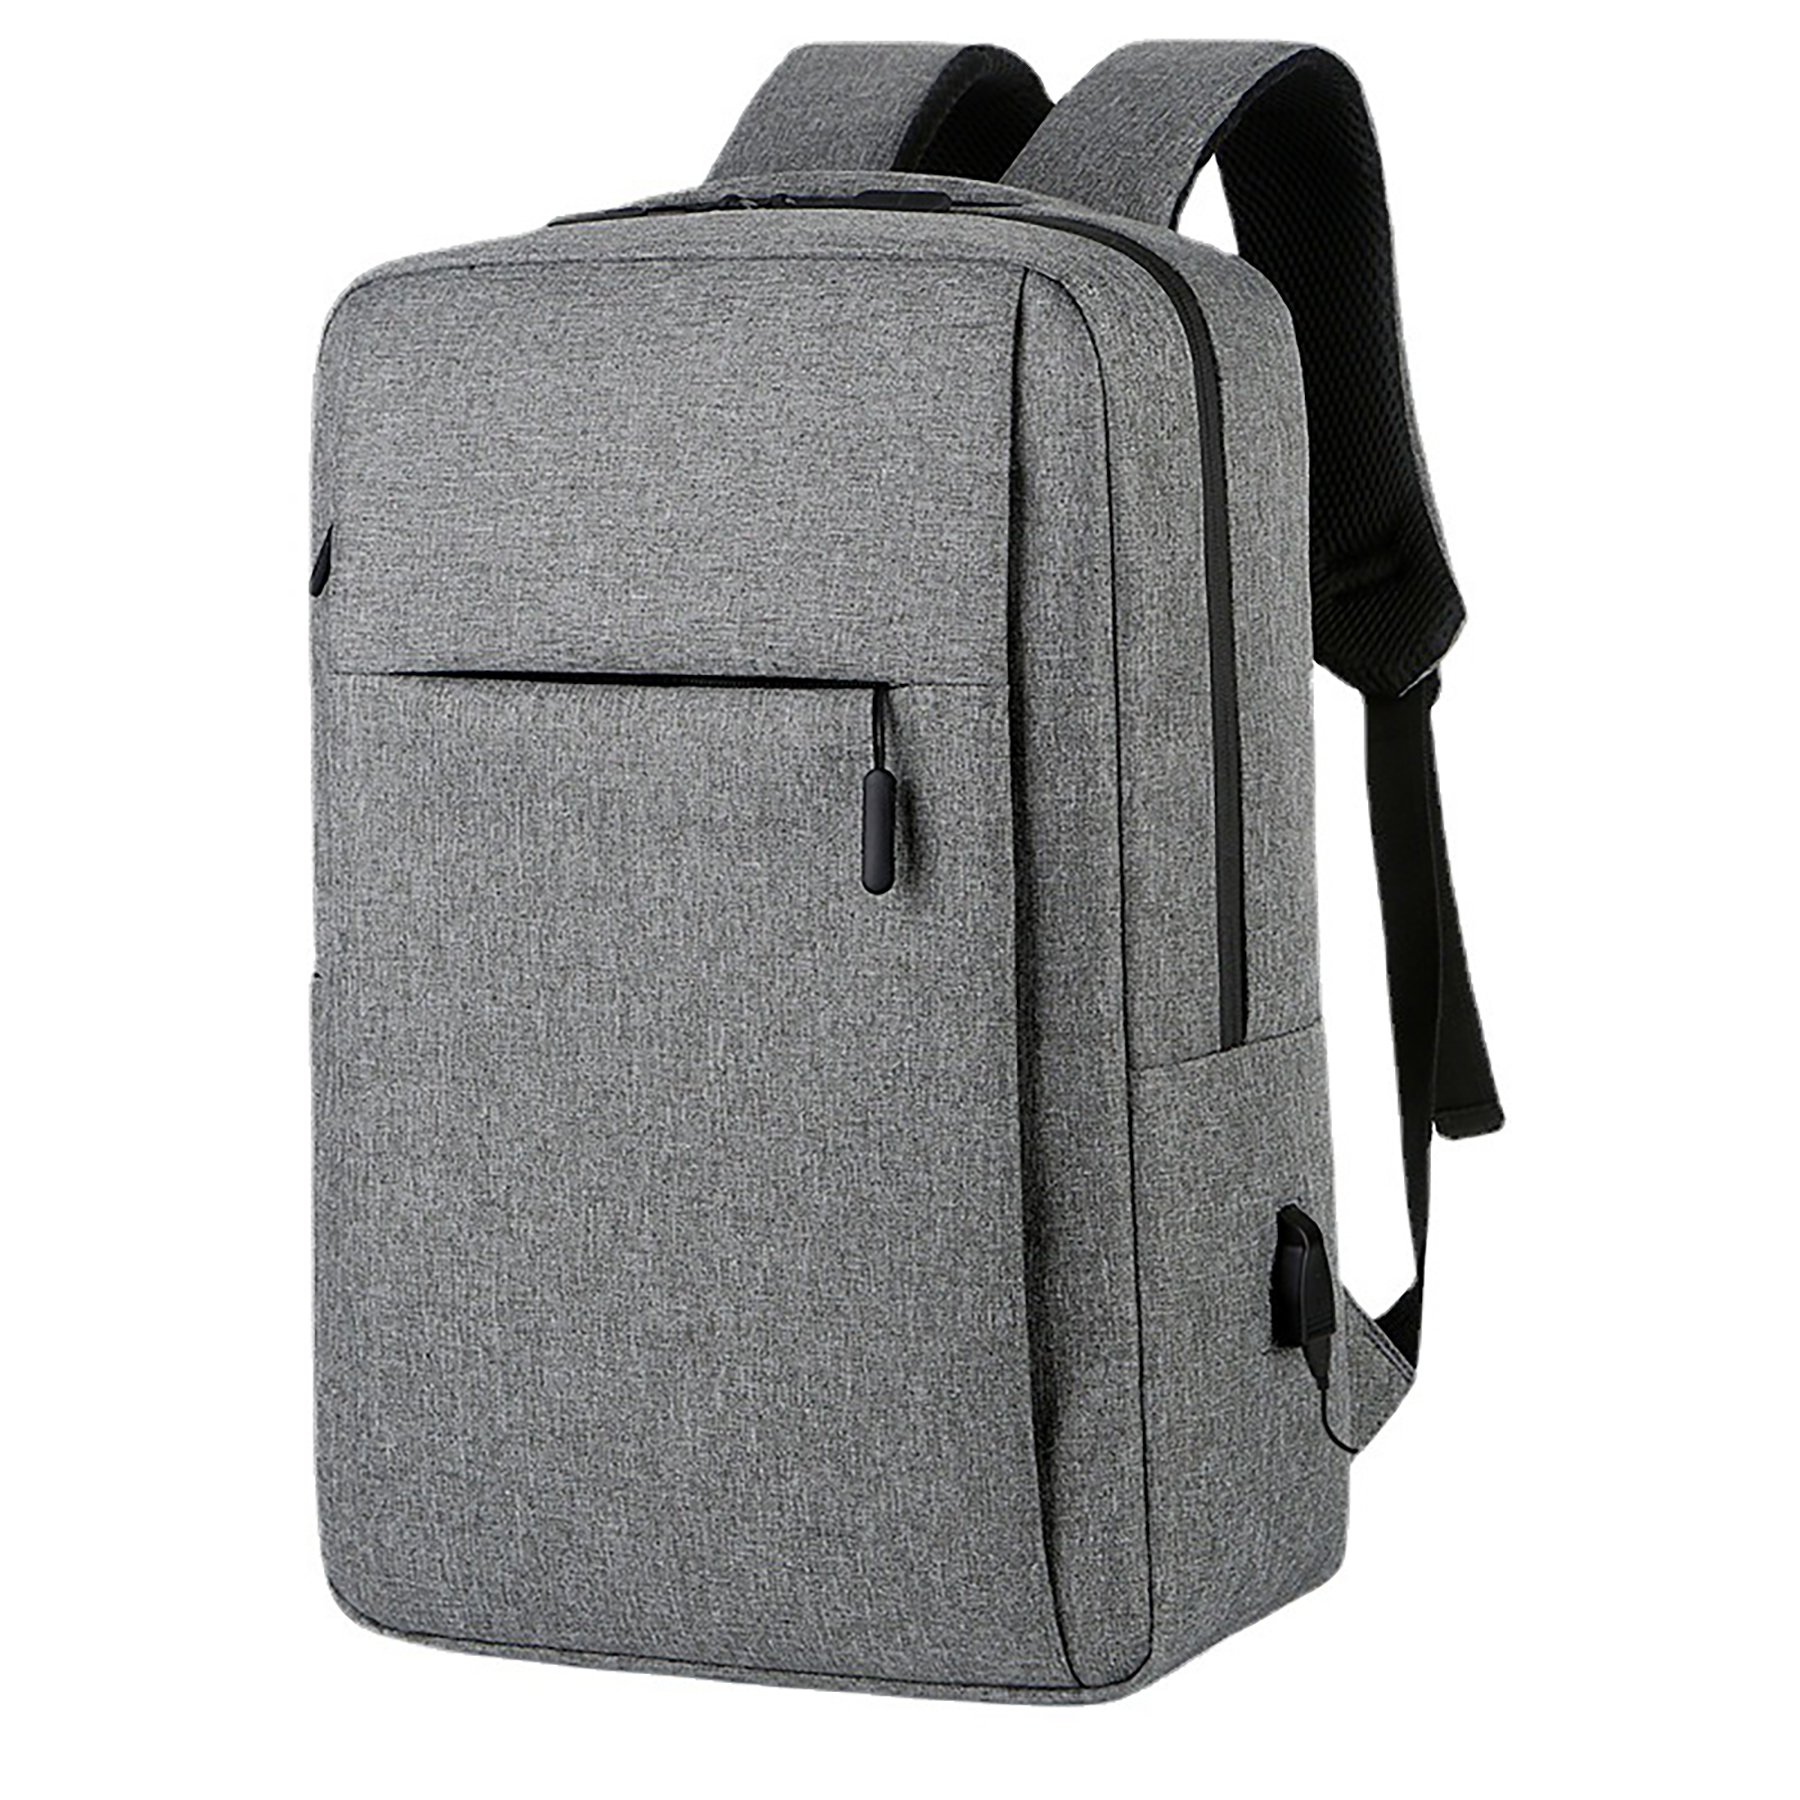 17 Inch Business Flight Approved Carry On Backpack with USB Charger Port and Luggage Sleeve